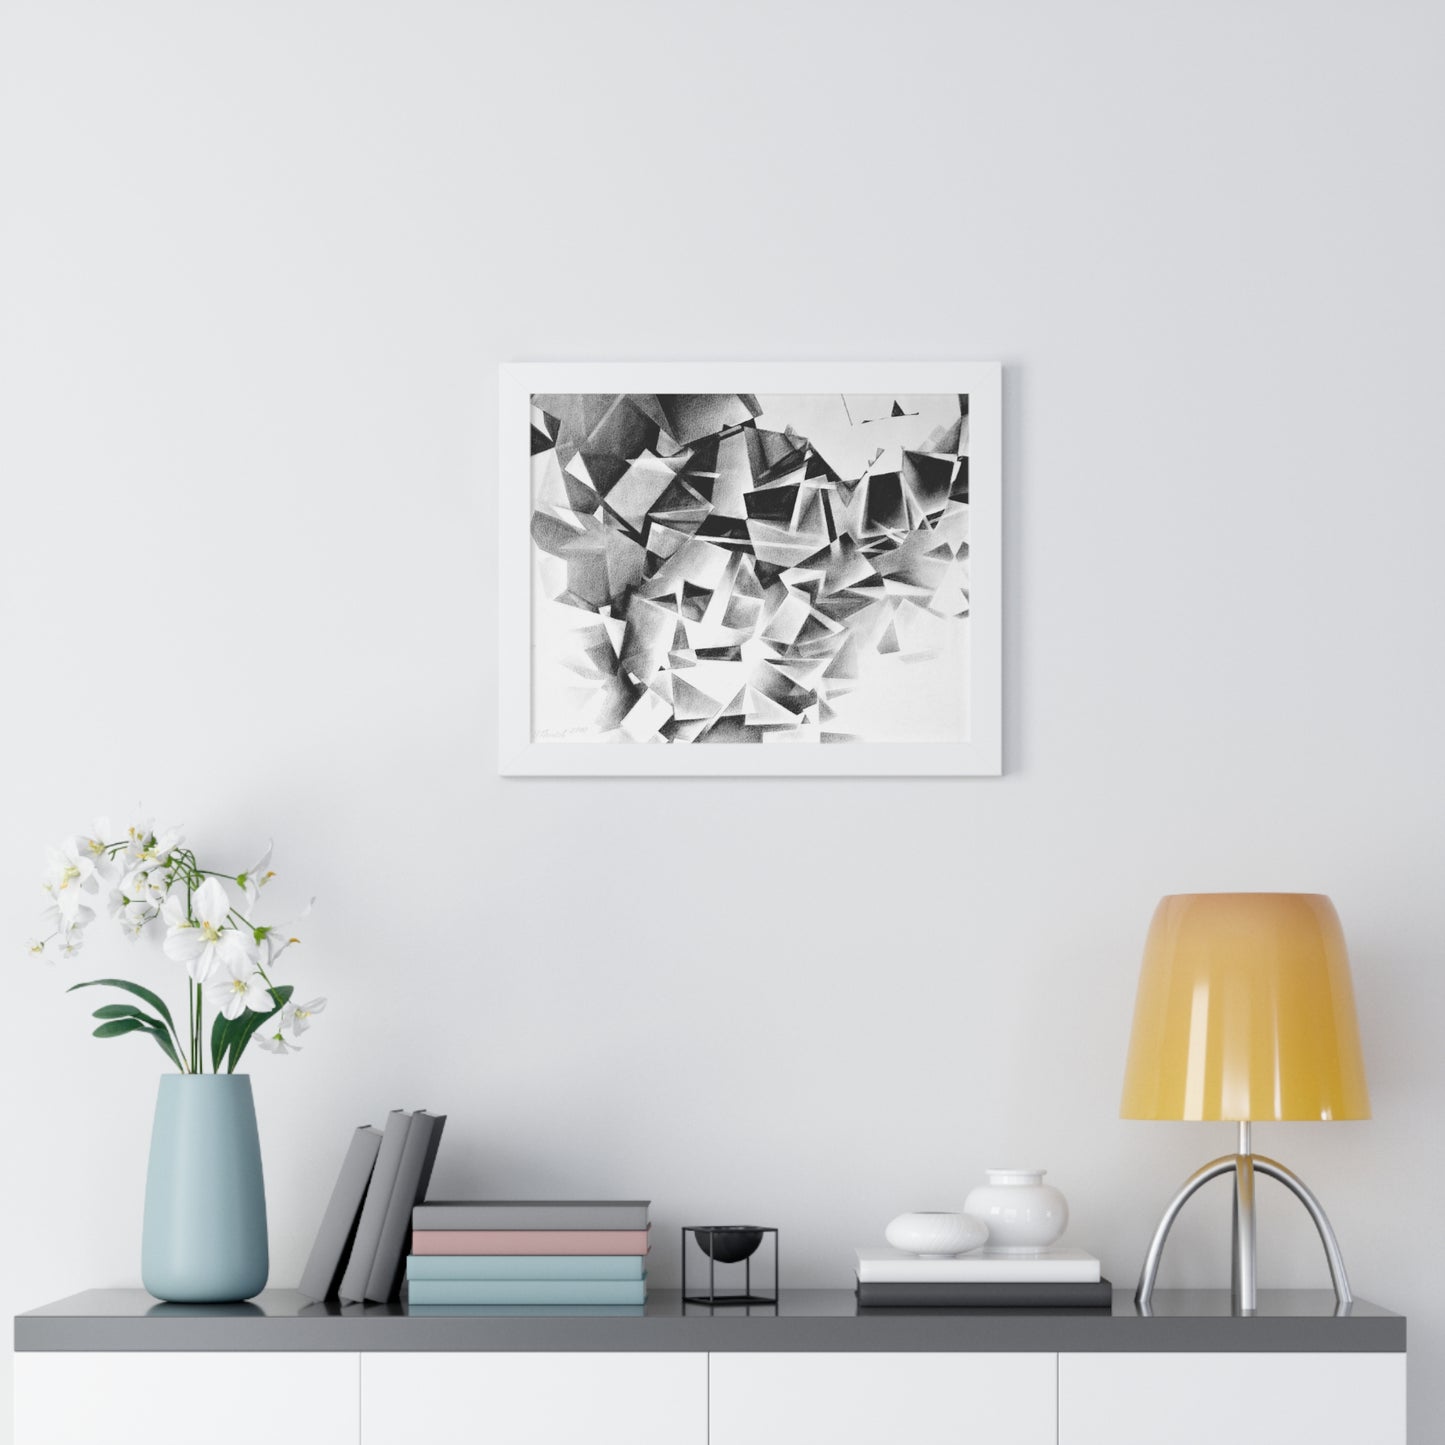 Whirlstructure I - Framed Poster Print, Wall Art, Charcoal, Abstract Black and White Decor